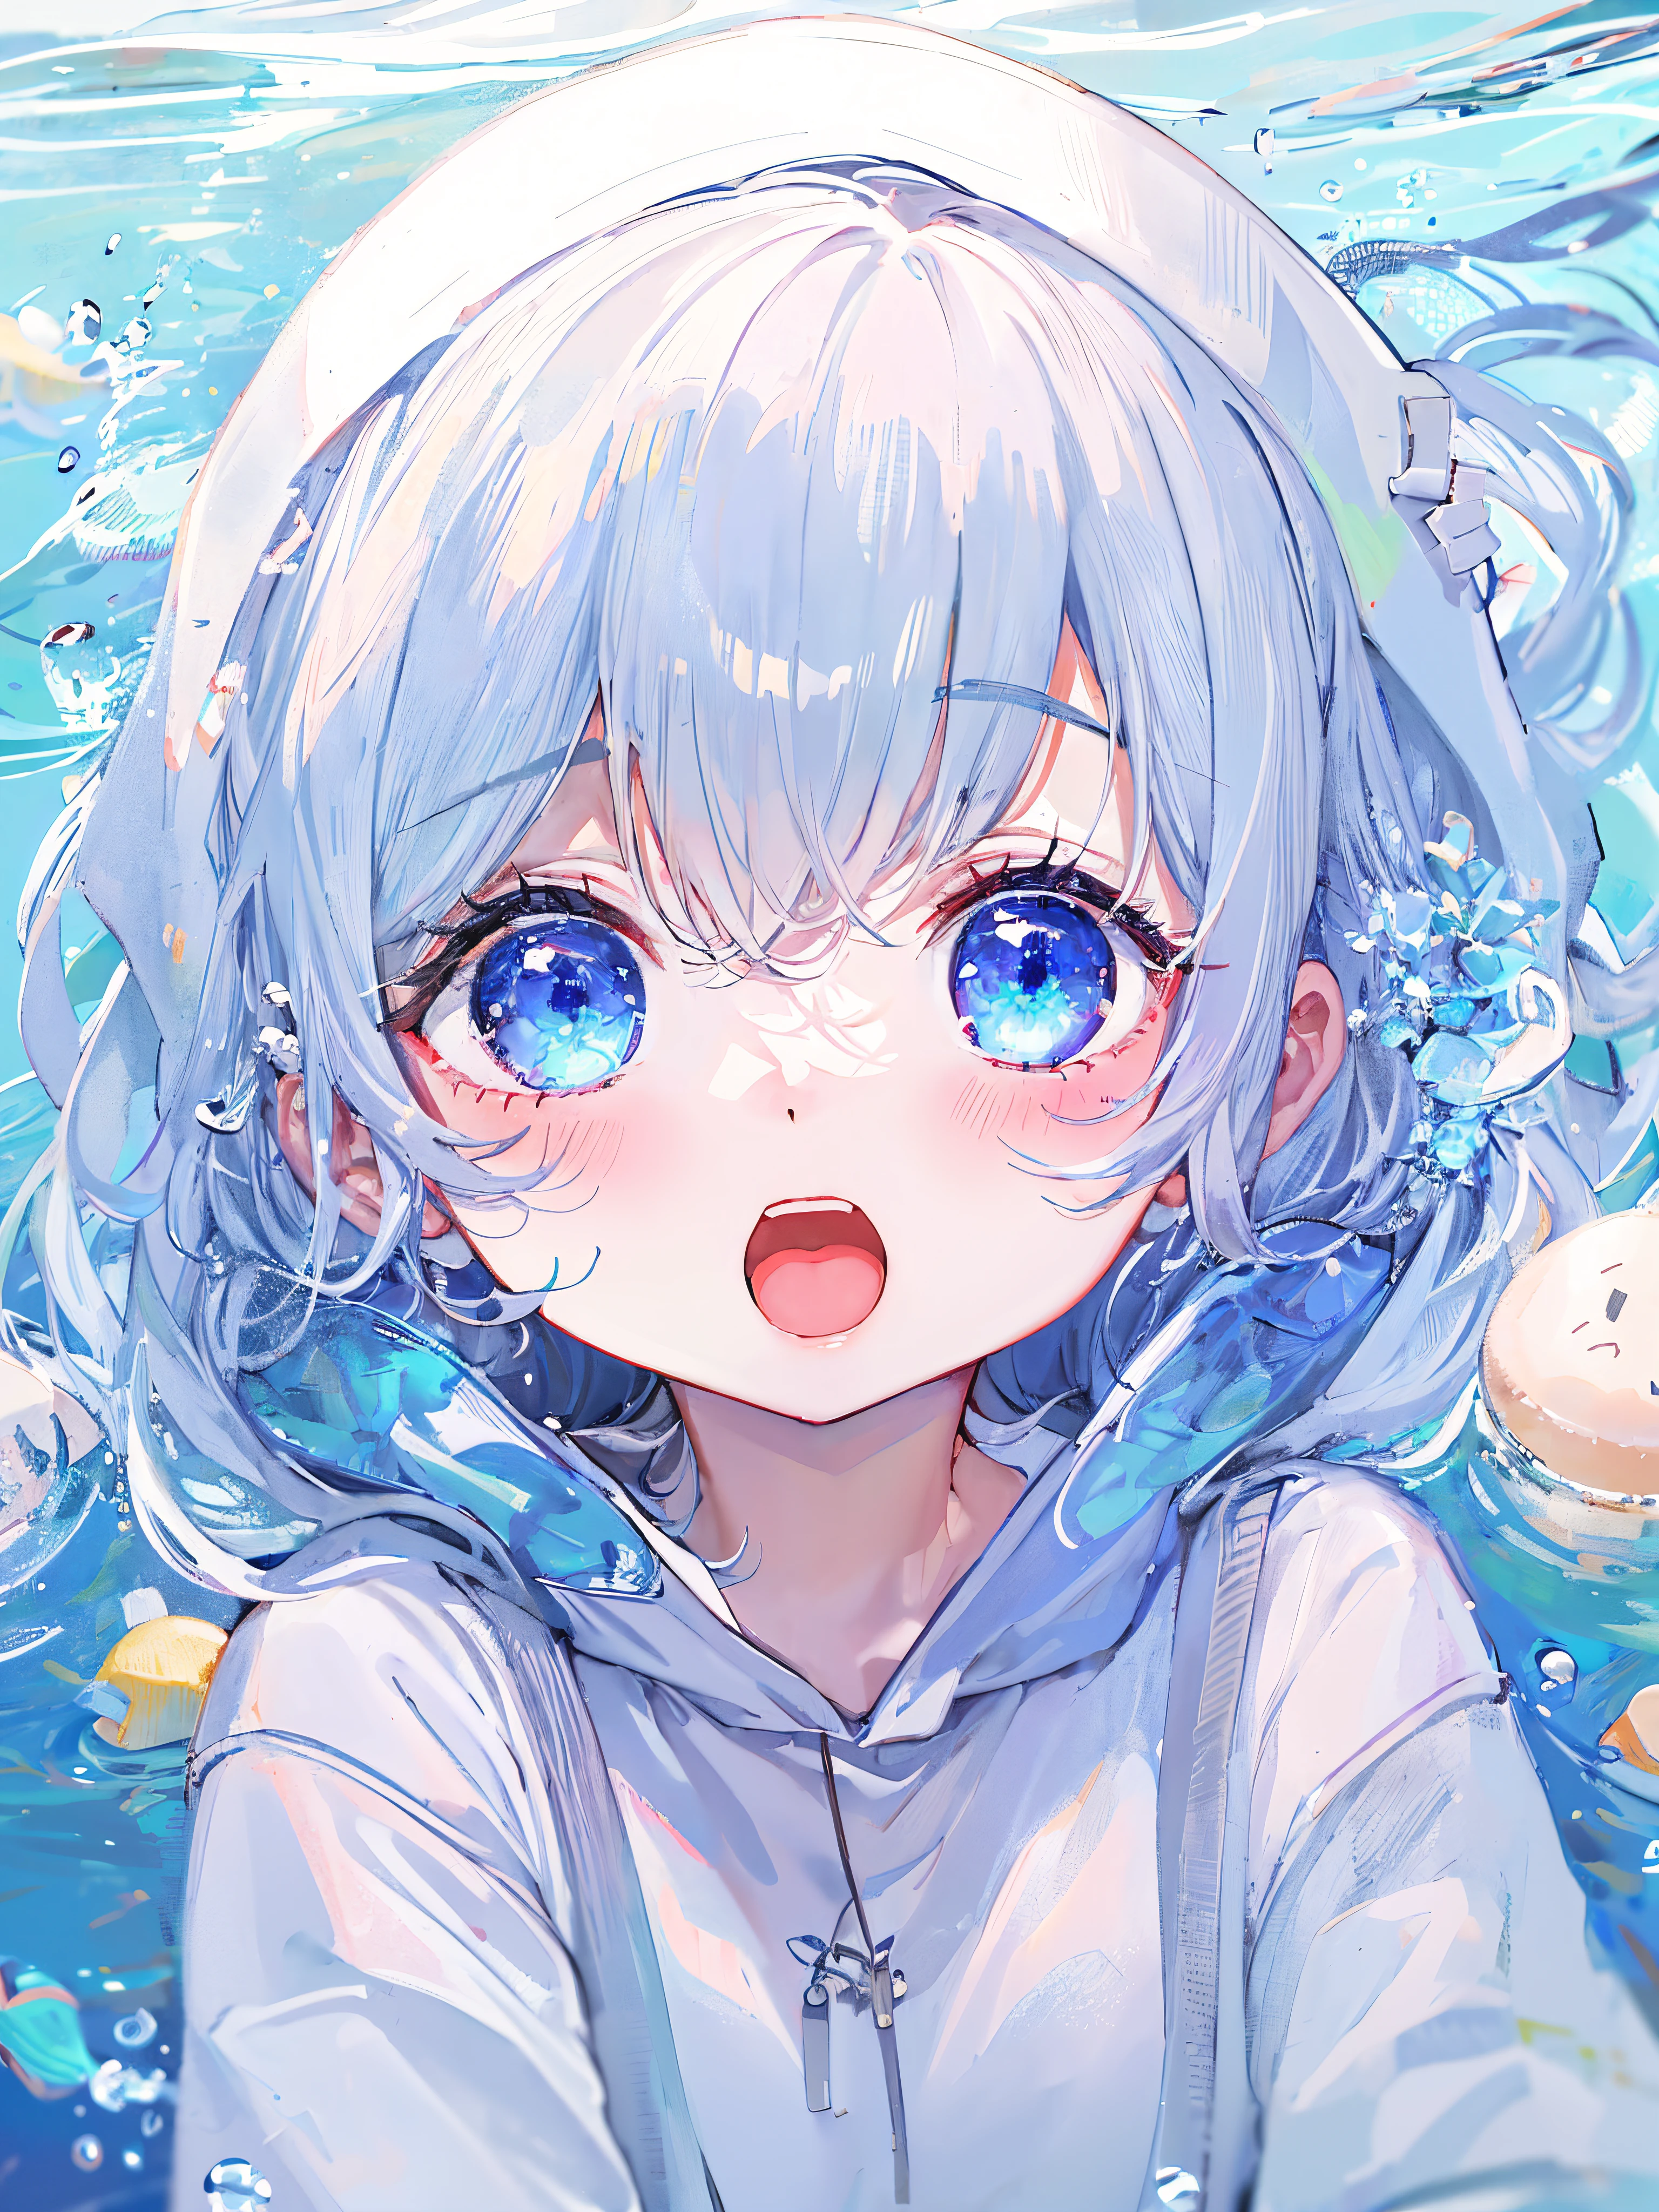 ((top-quality)), ((​masterpiece)), ((Ultra-detail)), (Extremely delicate and beautiful), girl with, solo, cold attitude,((White hoodie)),She is very(relax)with  the(Settled down)Looks,depth of fields,Evil smile,Bubble, under the water, Air bubble,Underwater world bright light blue eyes,inner color with bright gray hair and light blue tips,,,,,,,,,,,,,,,,,,,,,,,Cold background,Bob Hair - Linear Art, shortpants、knee high socks、White uniform like 、Light blue ribbon ties、Clothes are sheer、The hand in my right pocket is like a sapphire,Fronllesse Blue, A small blue light was floating、fantastic eyes、selfy,Self-shot、Bangs fall on the eyes, give a sexy impression.